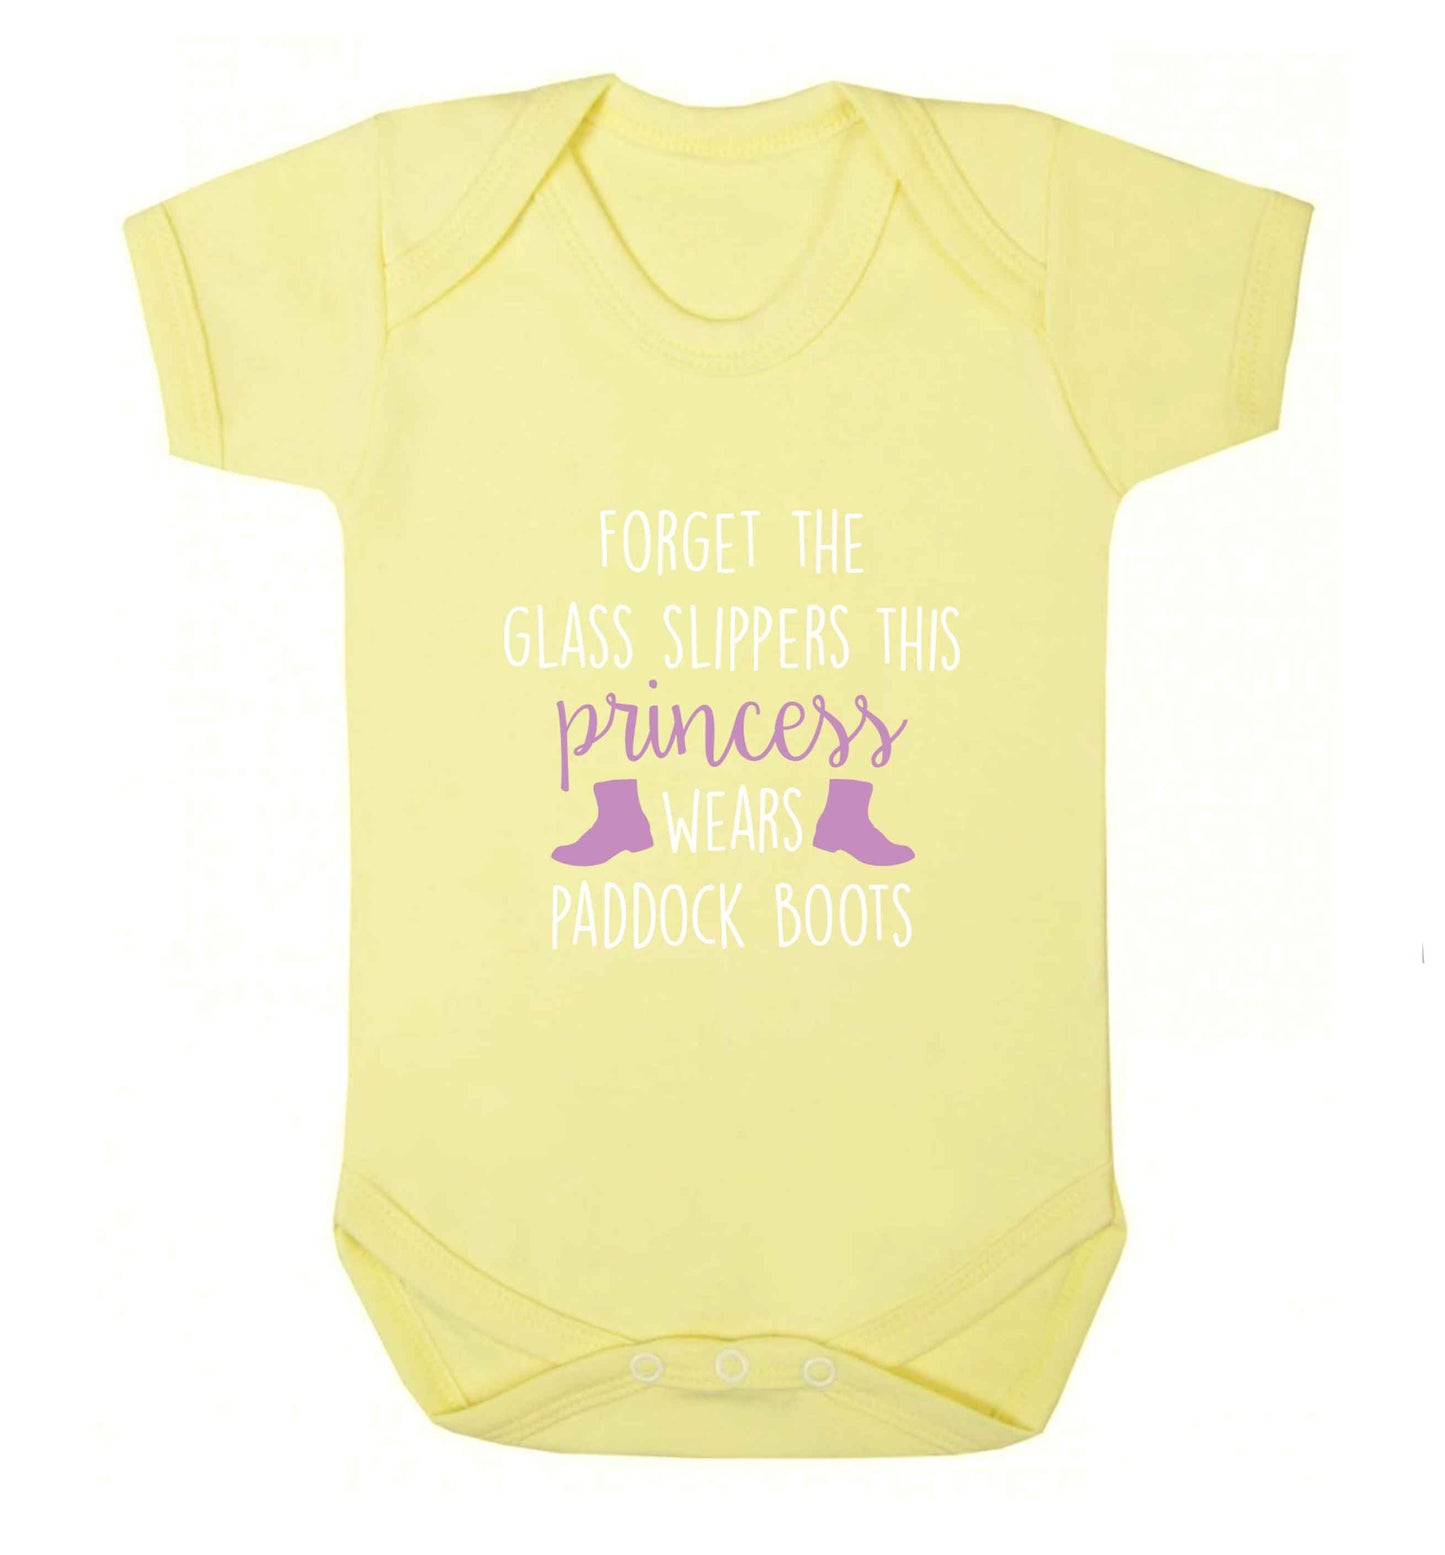 Forget the glass slippers this princess wears paddock boots baby vest pale yellow 18-24 months